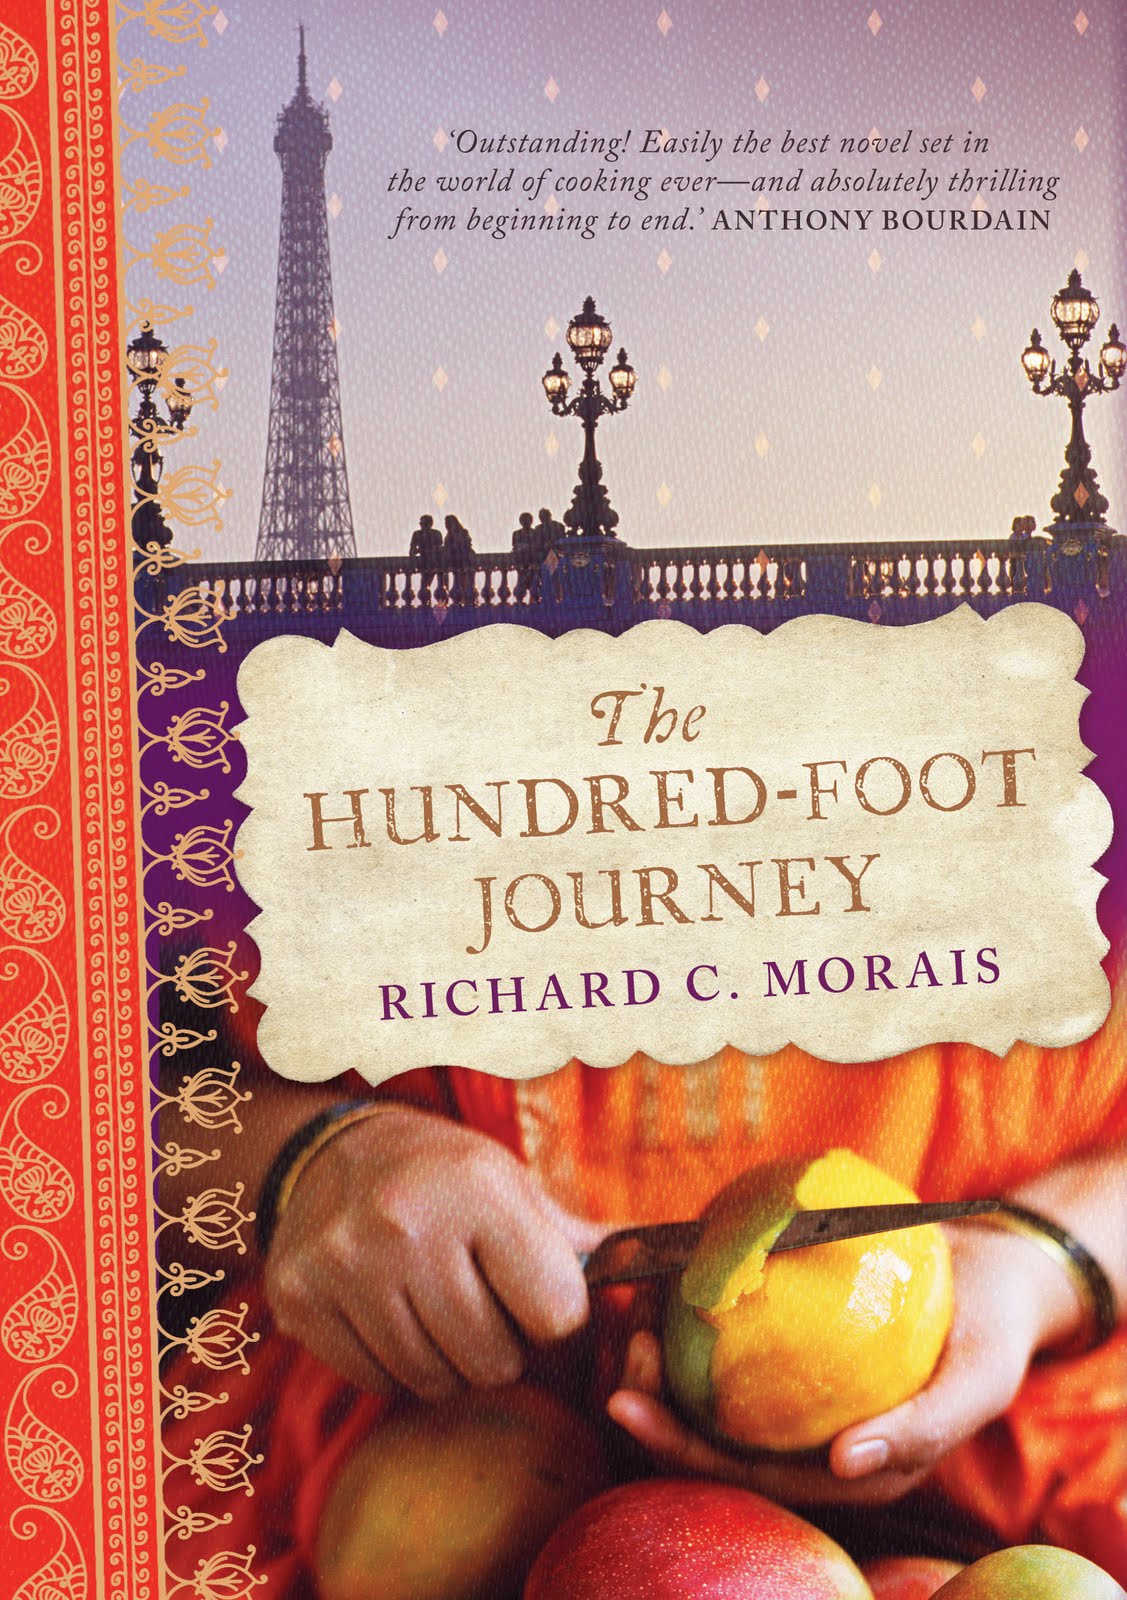 Tiny Library: The Hundred Foot Journey by Richard C Morais